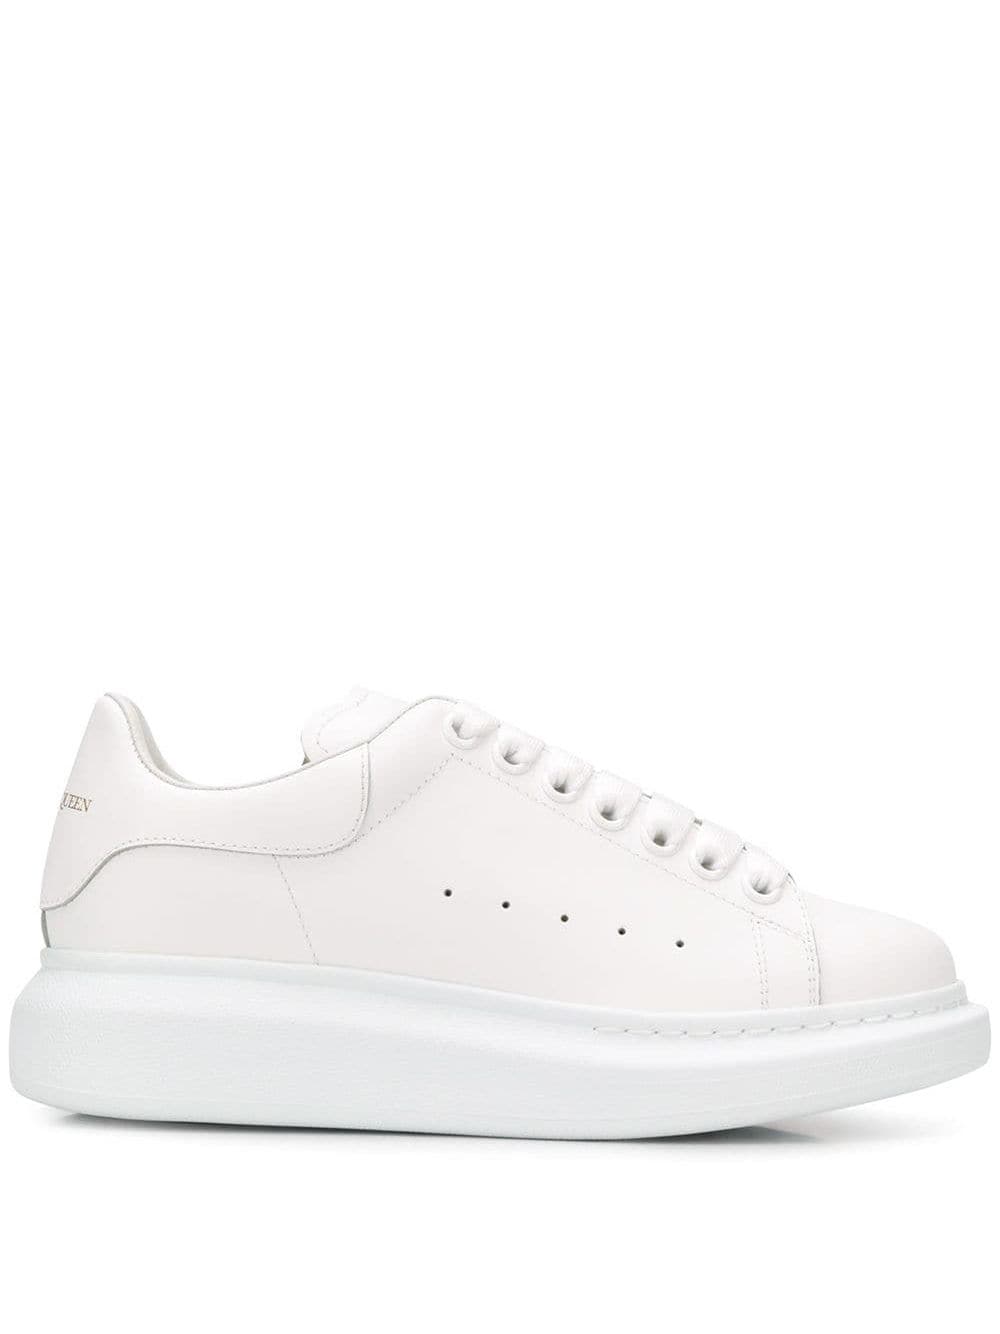 White calf leather Oversized low-top sneakers